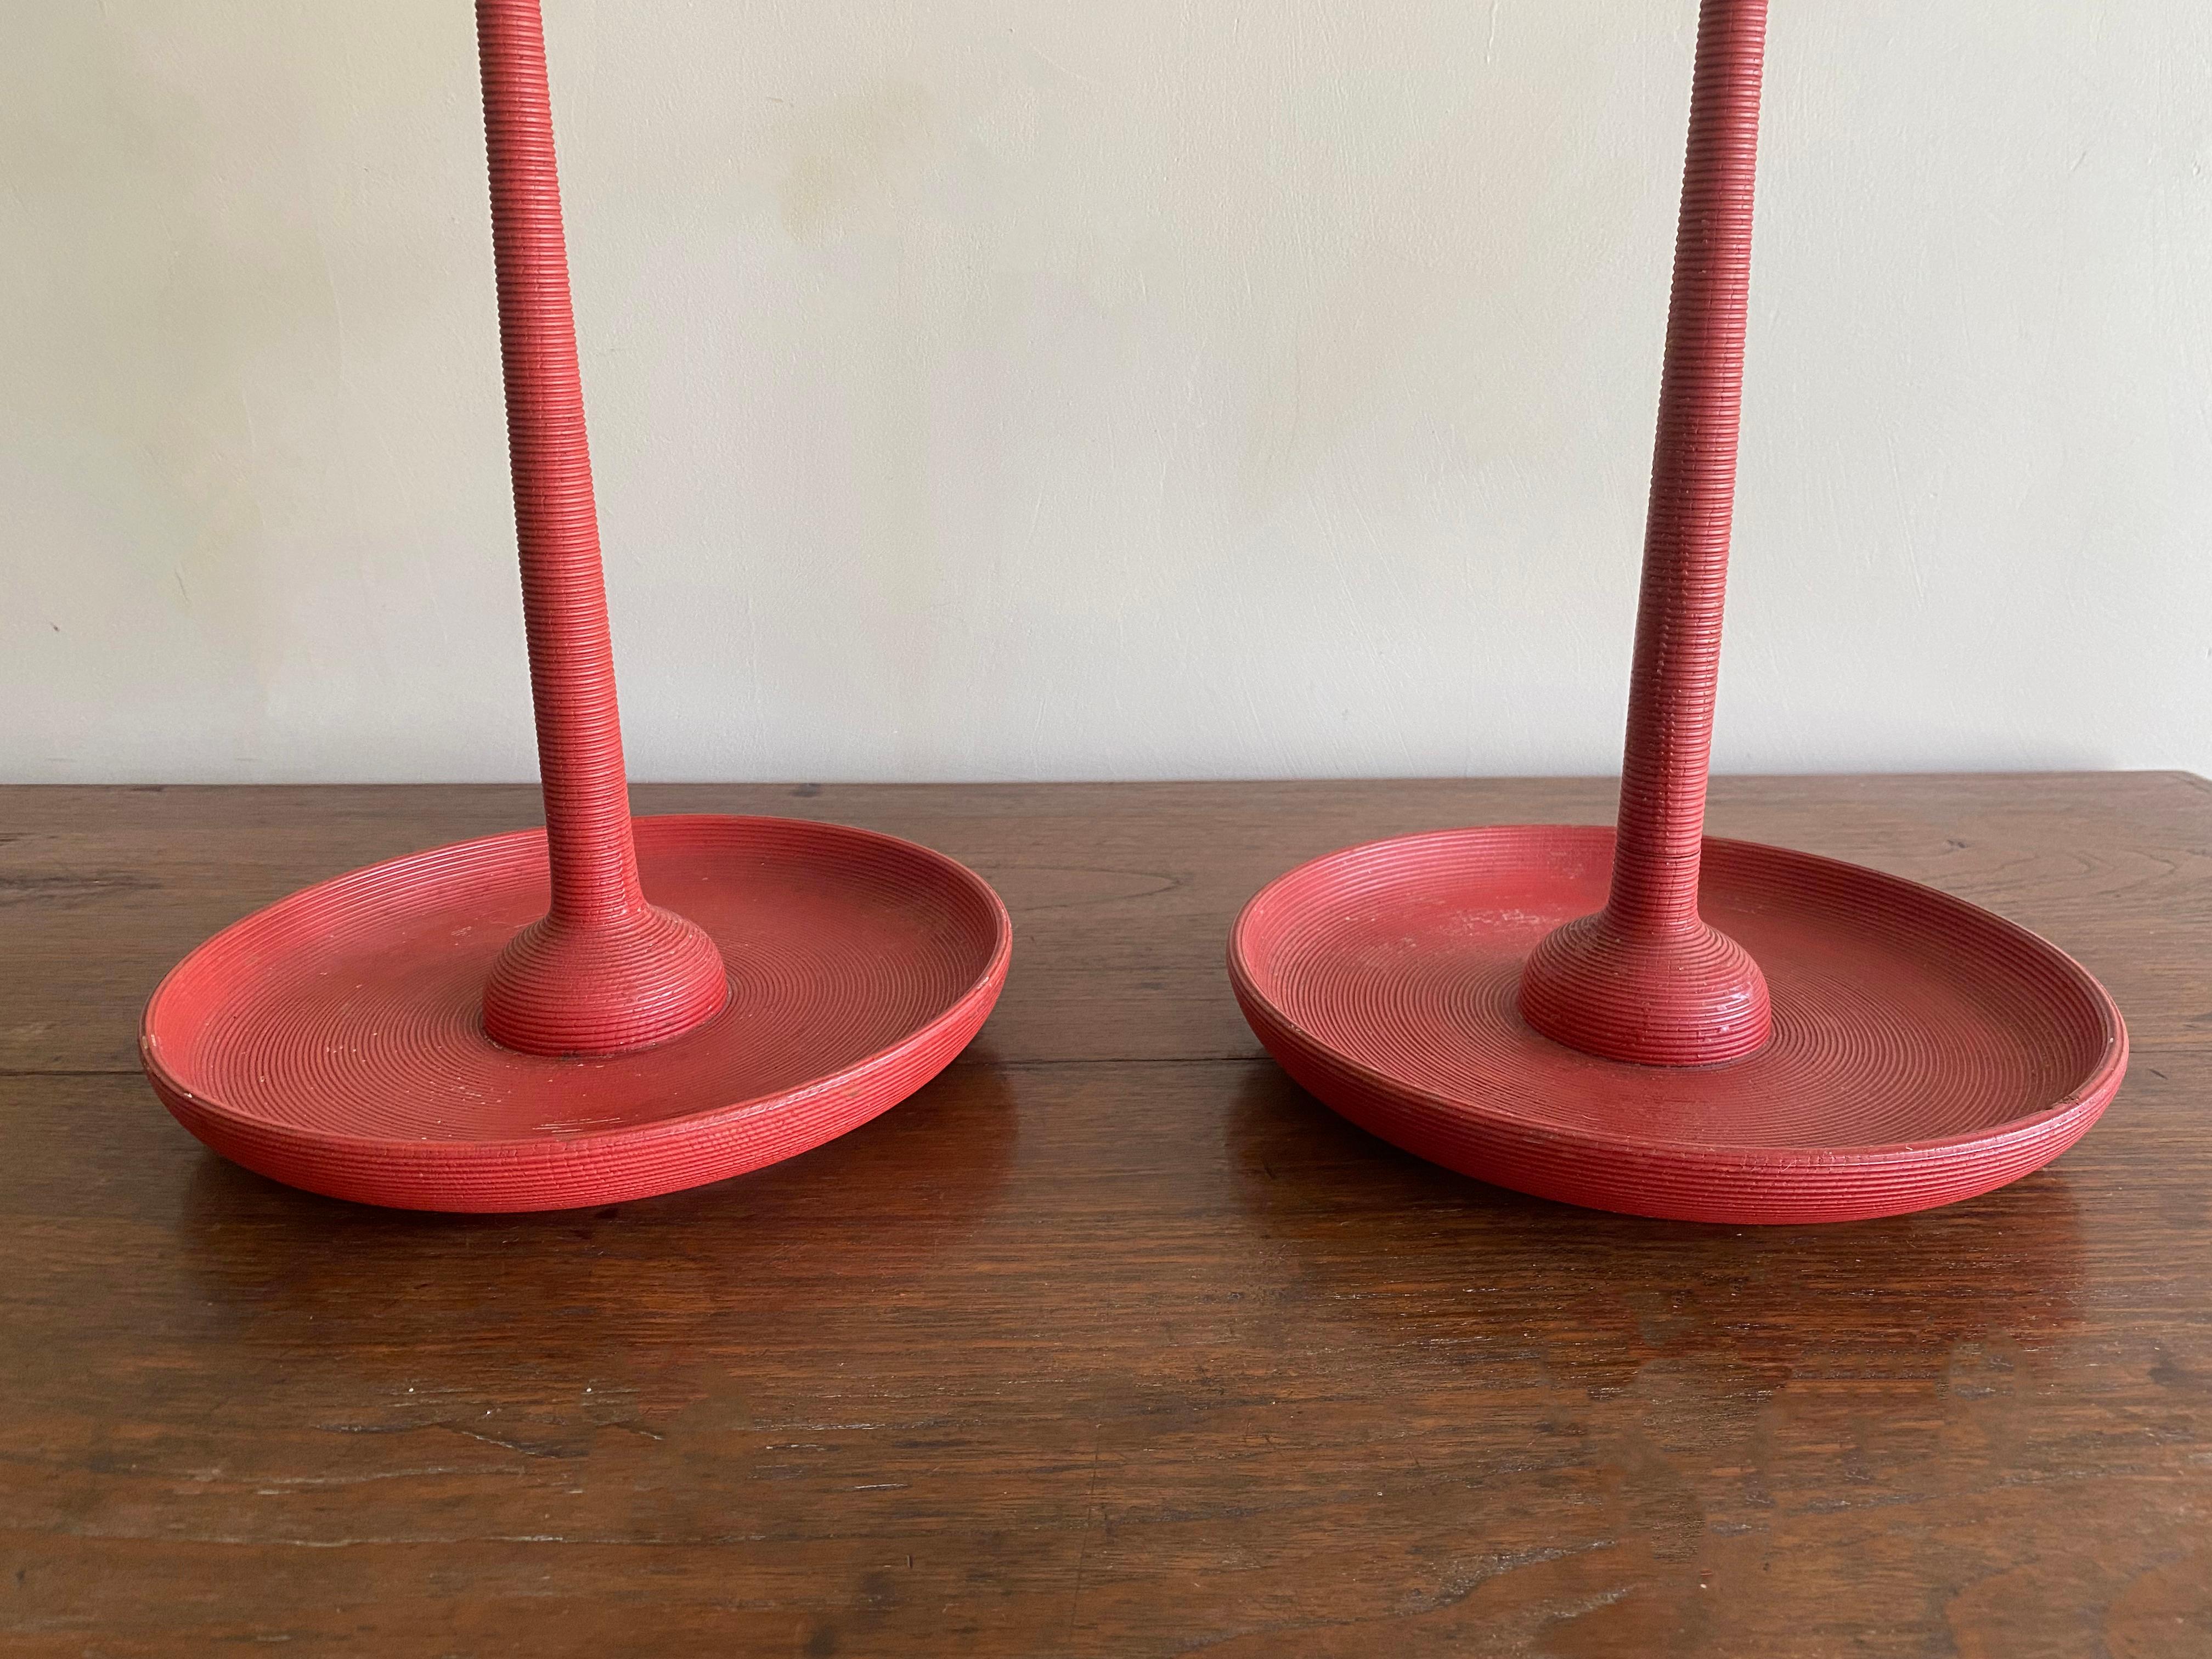 Japanese Red Lacquer Ribbed Candle Holder Pair, Meji Period c. 1900 For Sale 1